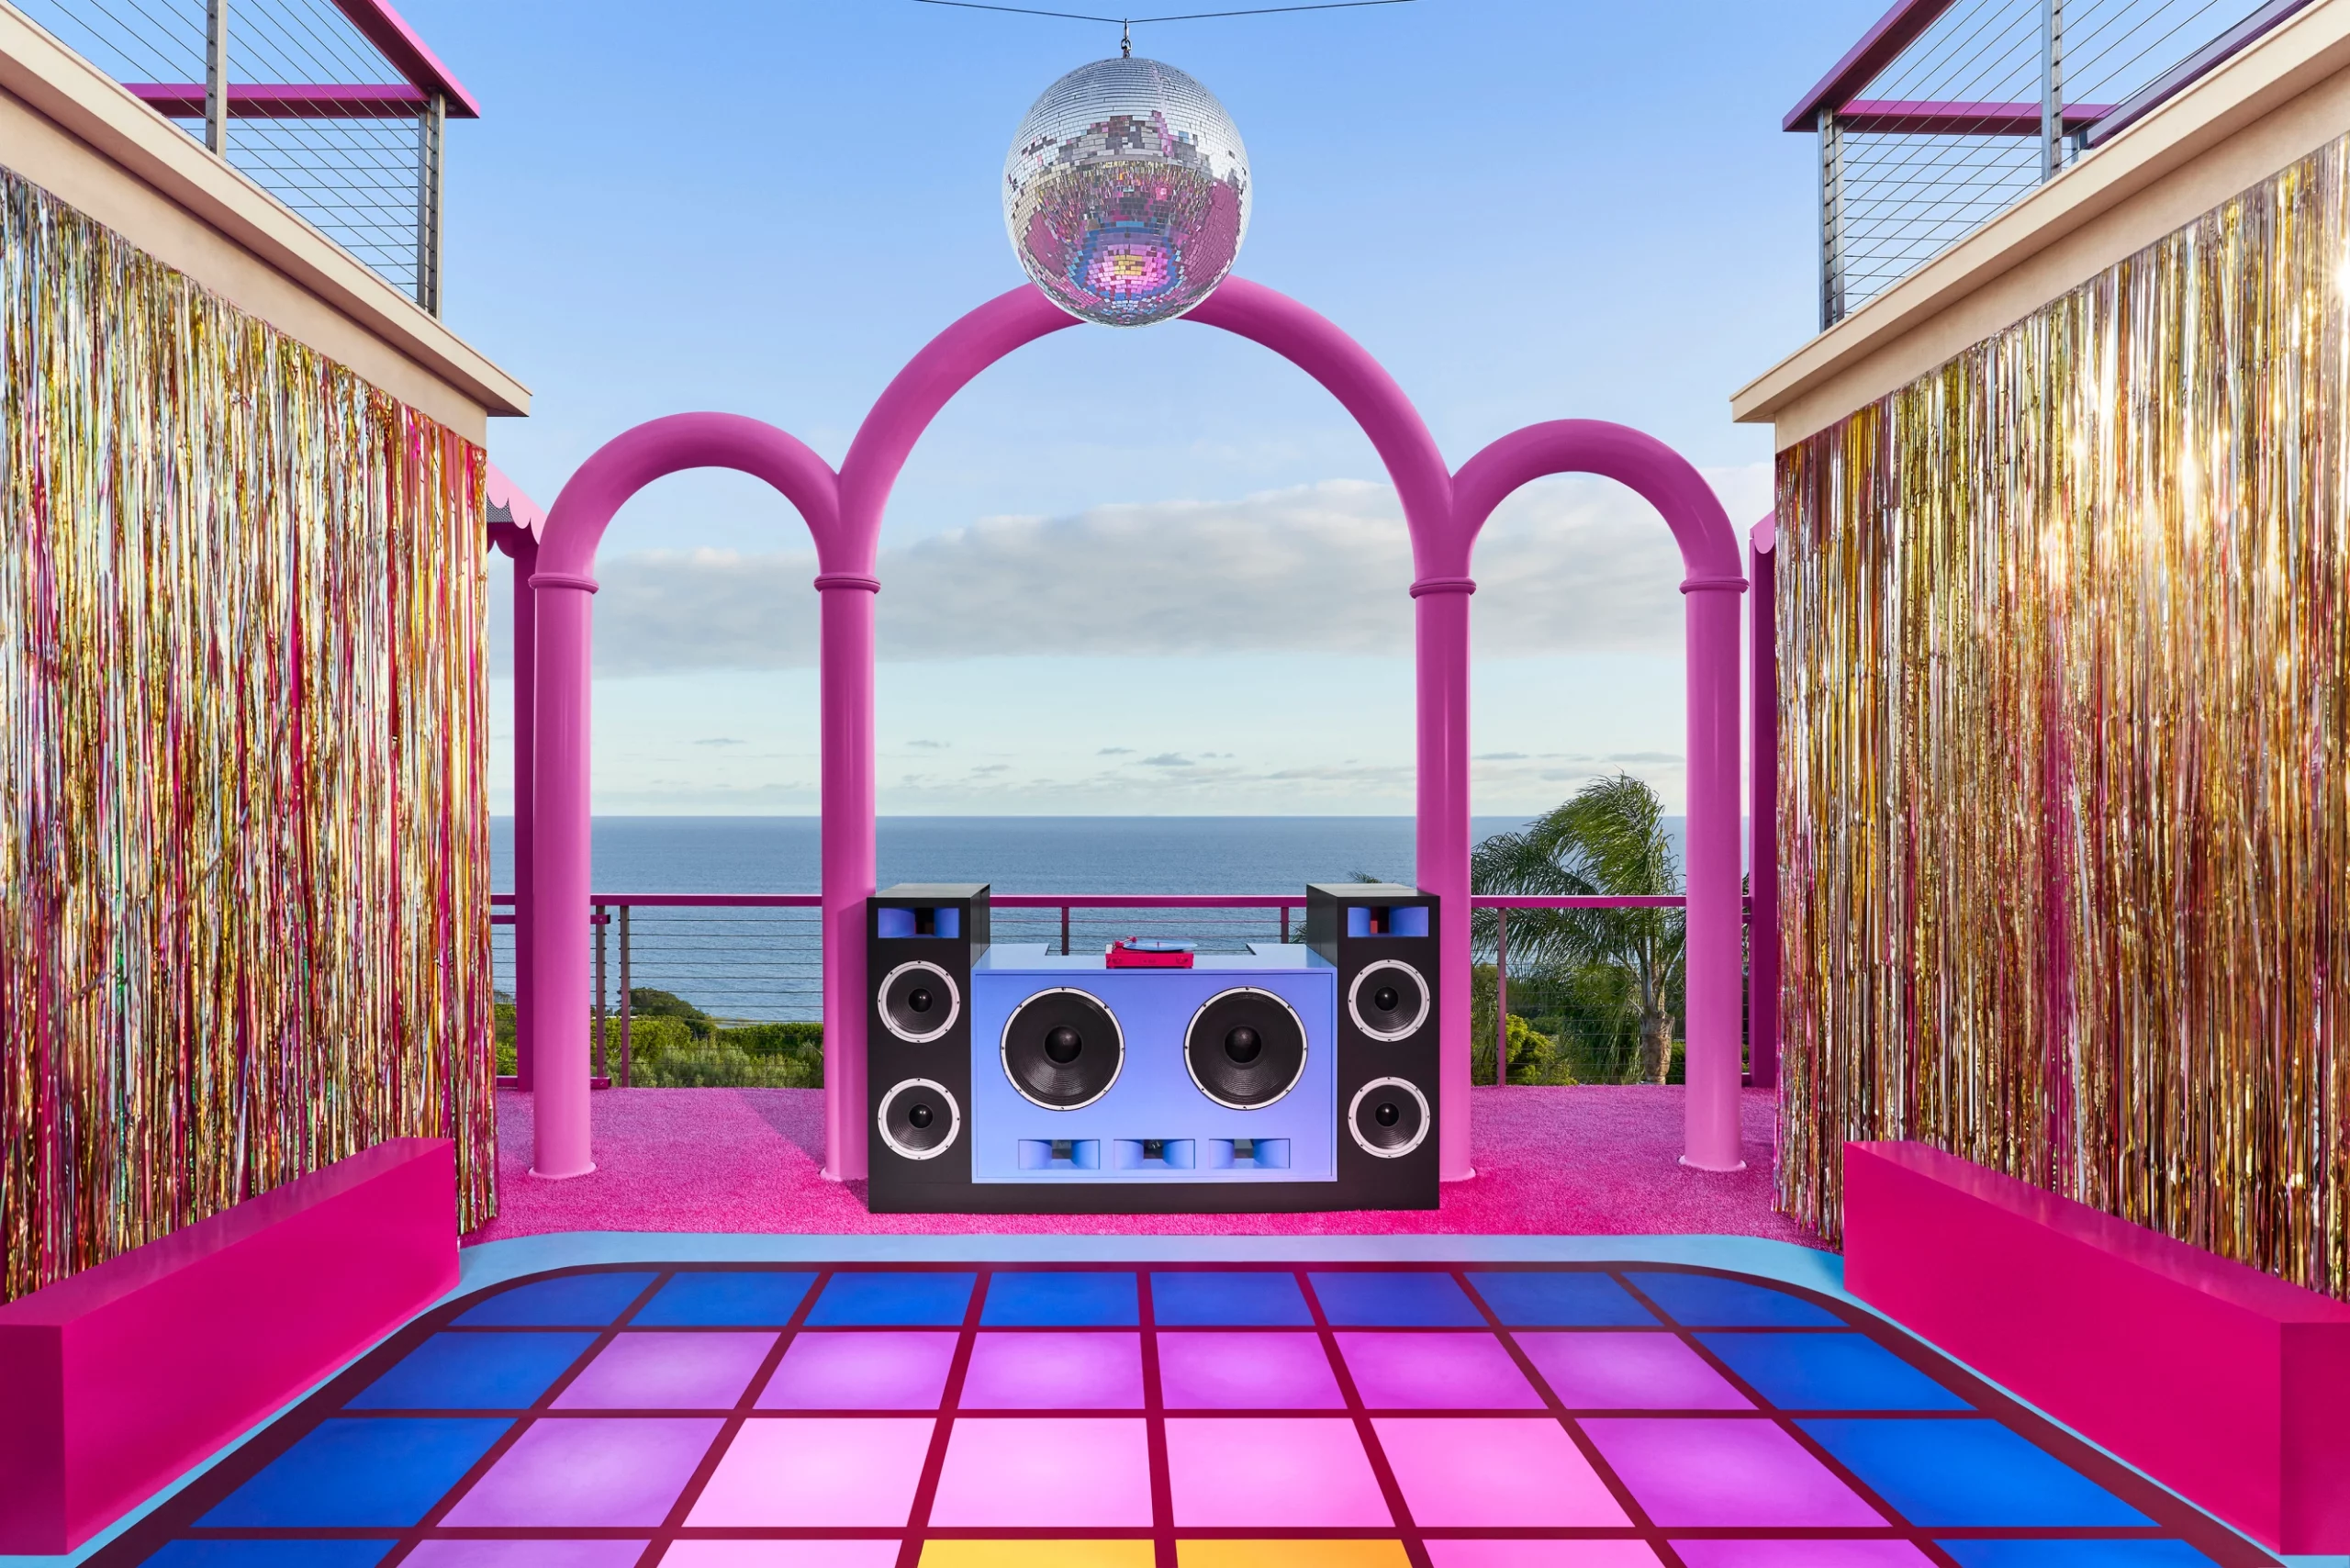 Barbie’s Malibu DreamHouse on Airbnb Hosted by Ryan Gosling